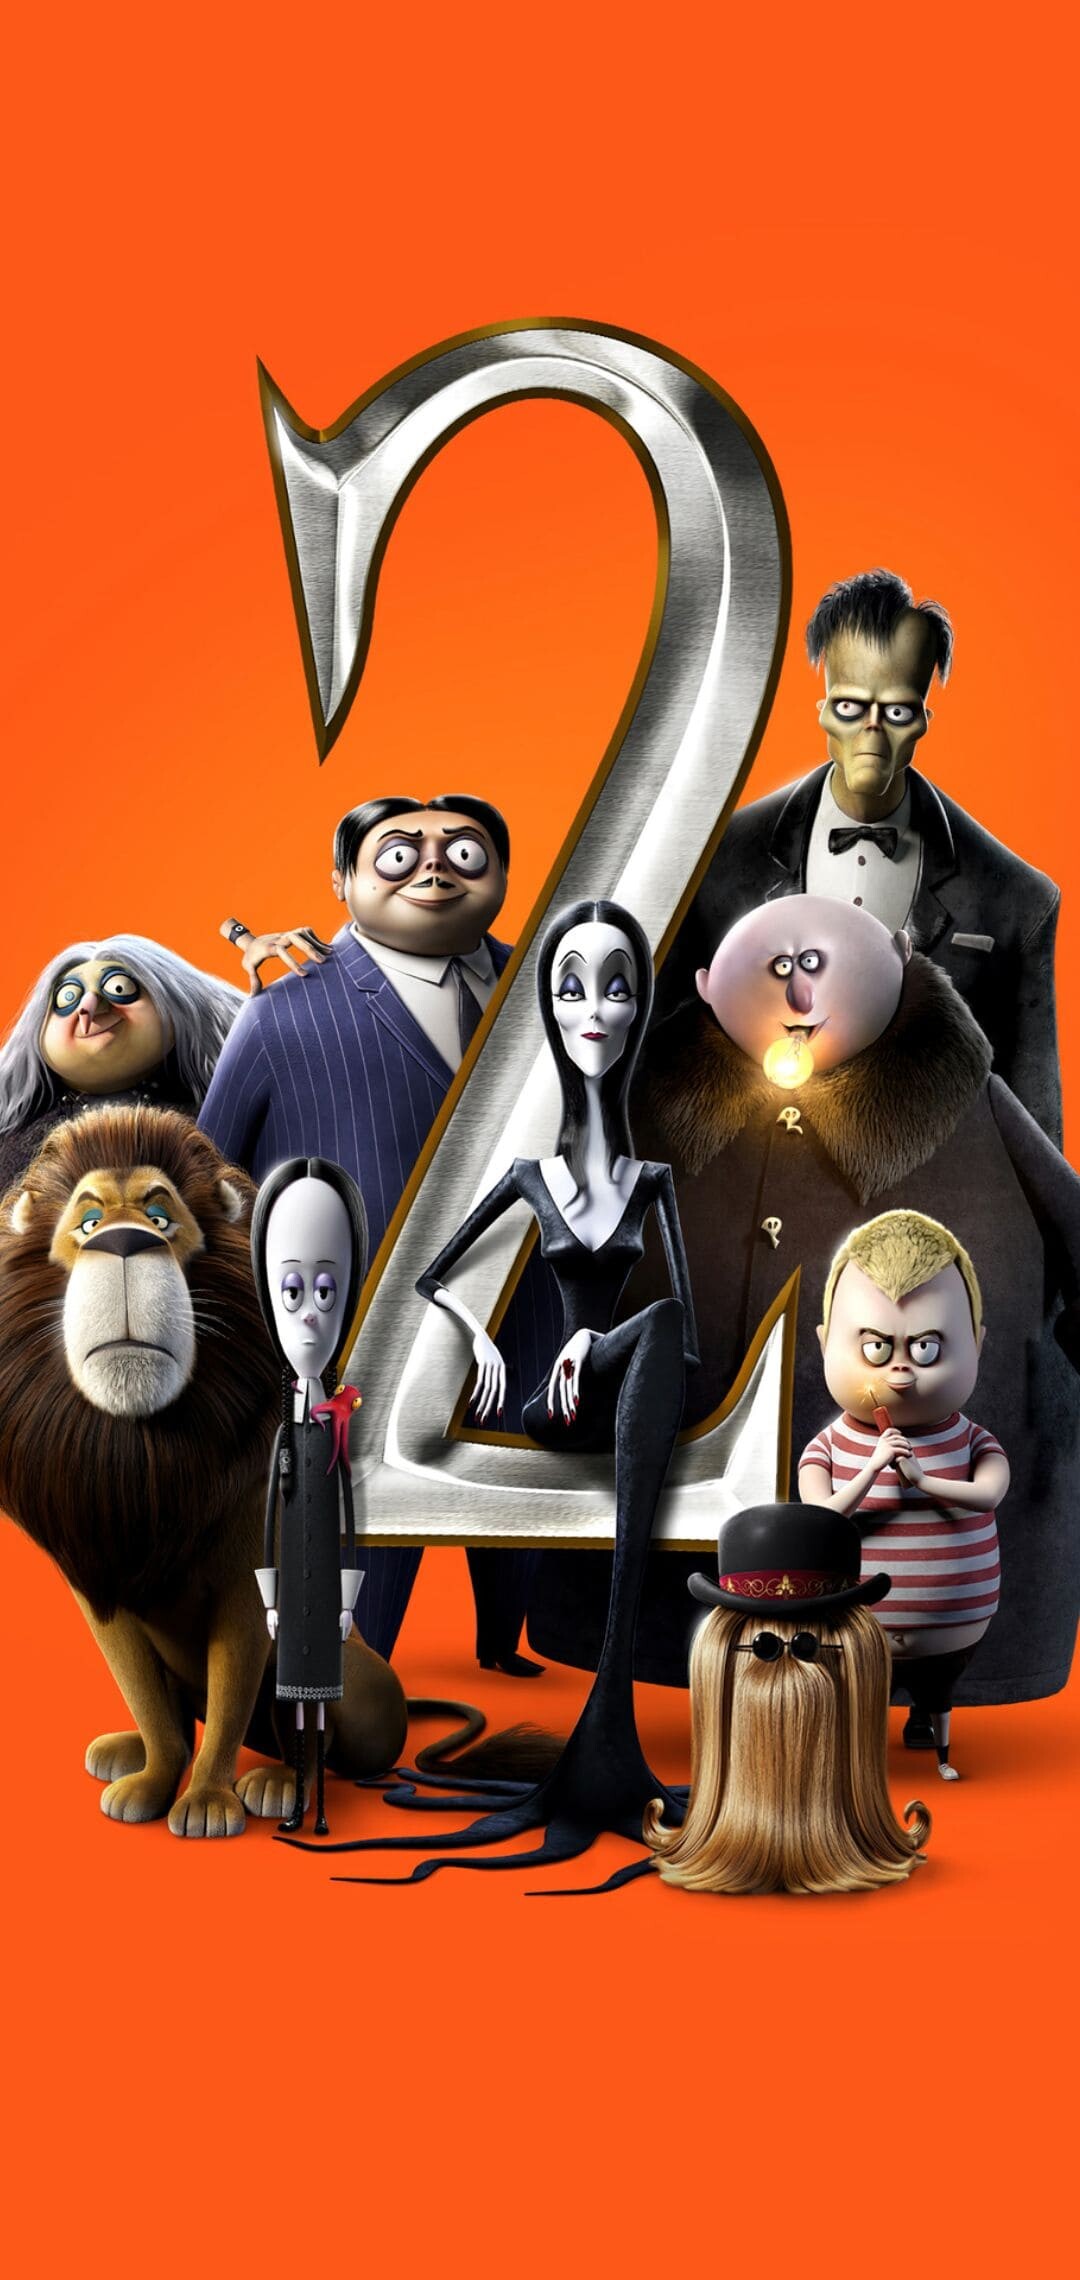 The Addams Family 2: The story of the Addamses as they go on a road trip, 2021. 1080x2280 HD Wallpaper.